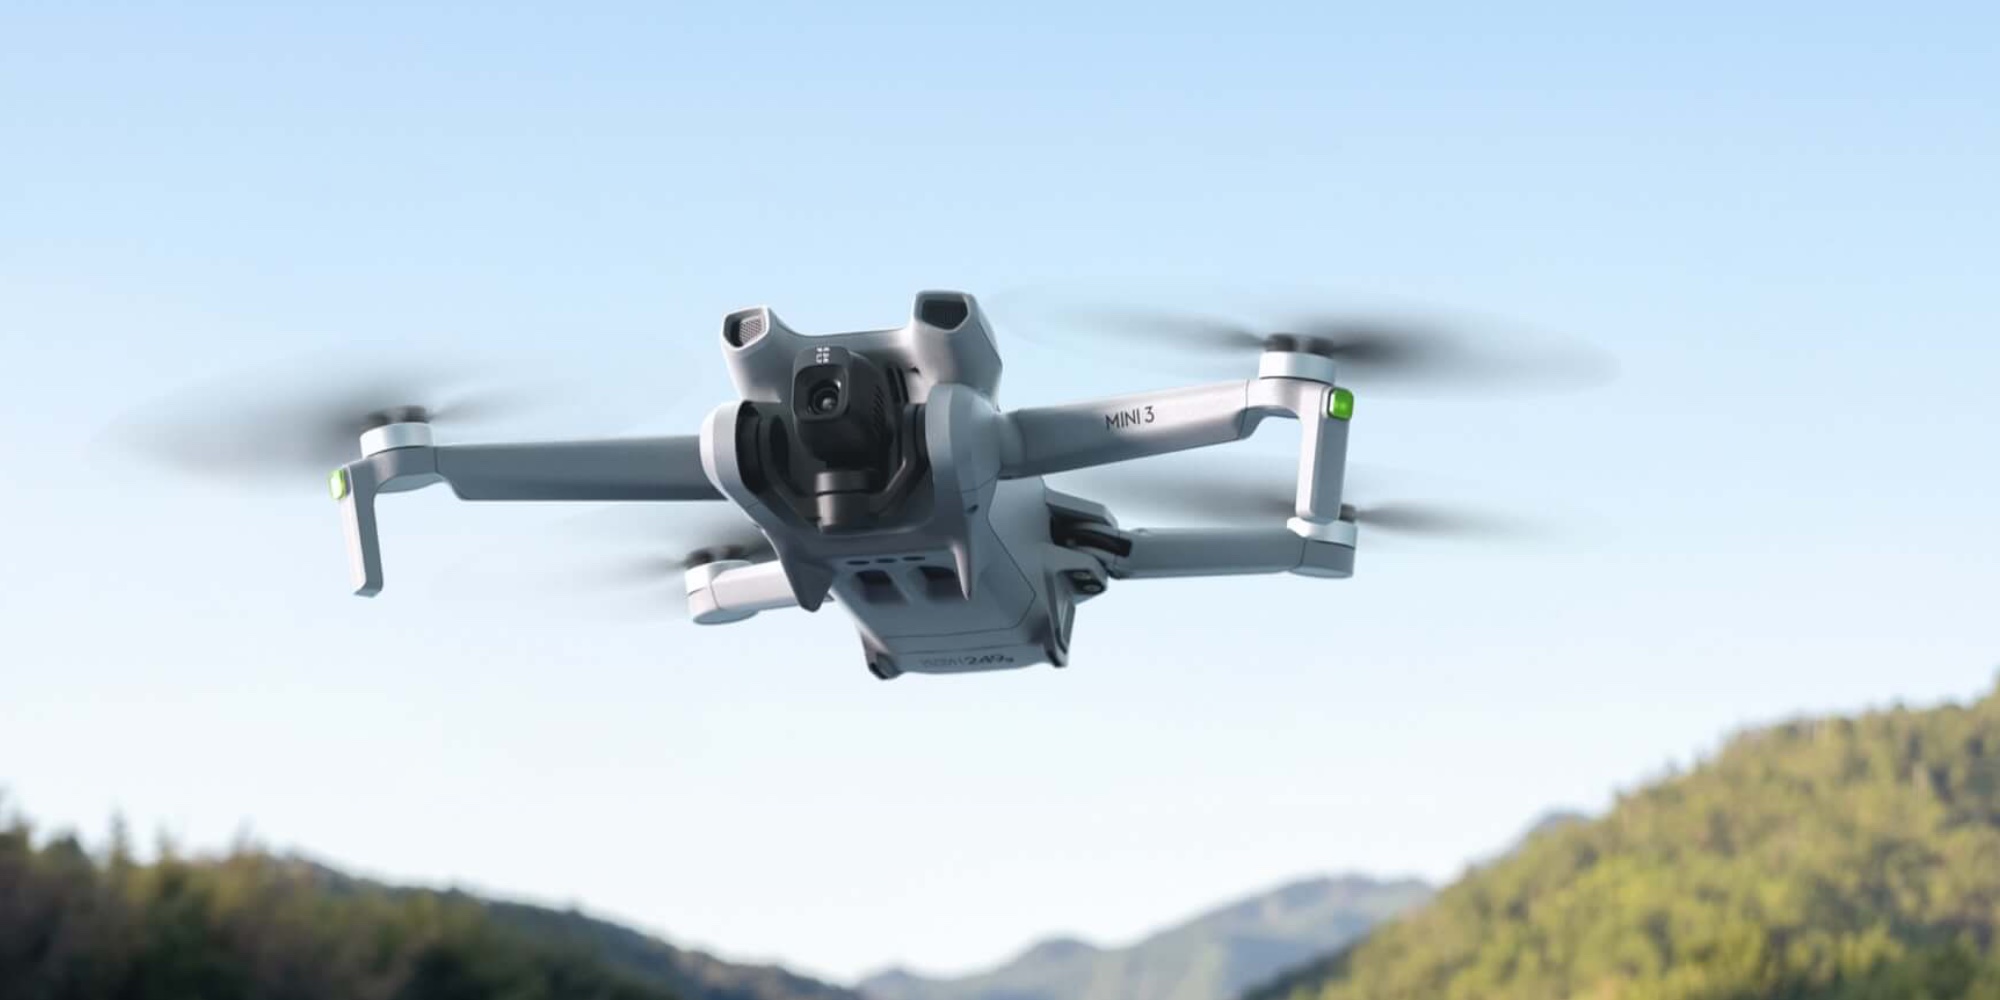 DJI's Mini 3 Fly More Combo drops to $699 with DJI RC, extra